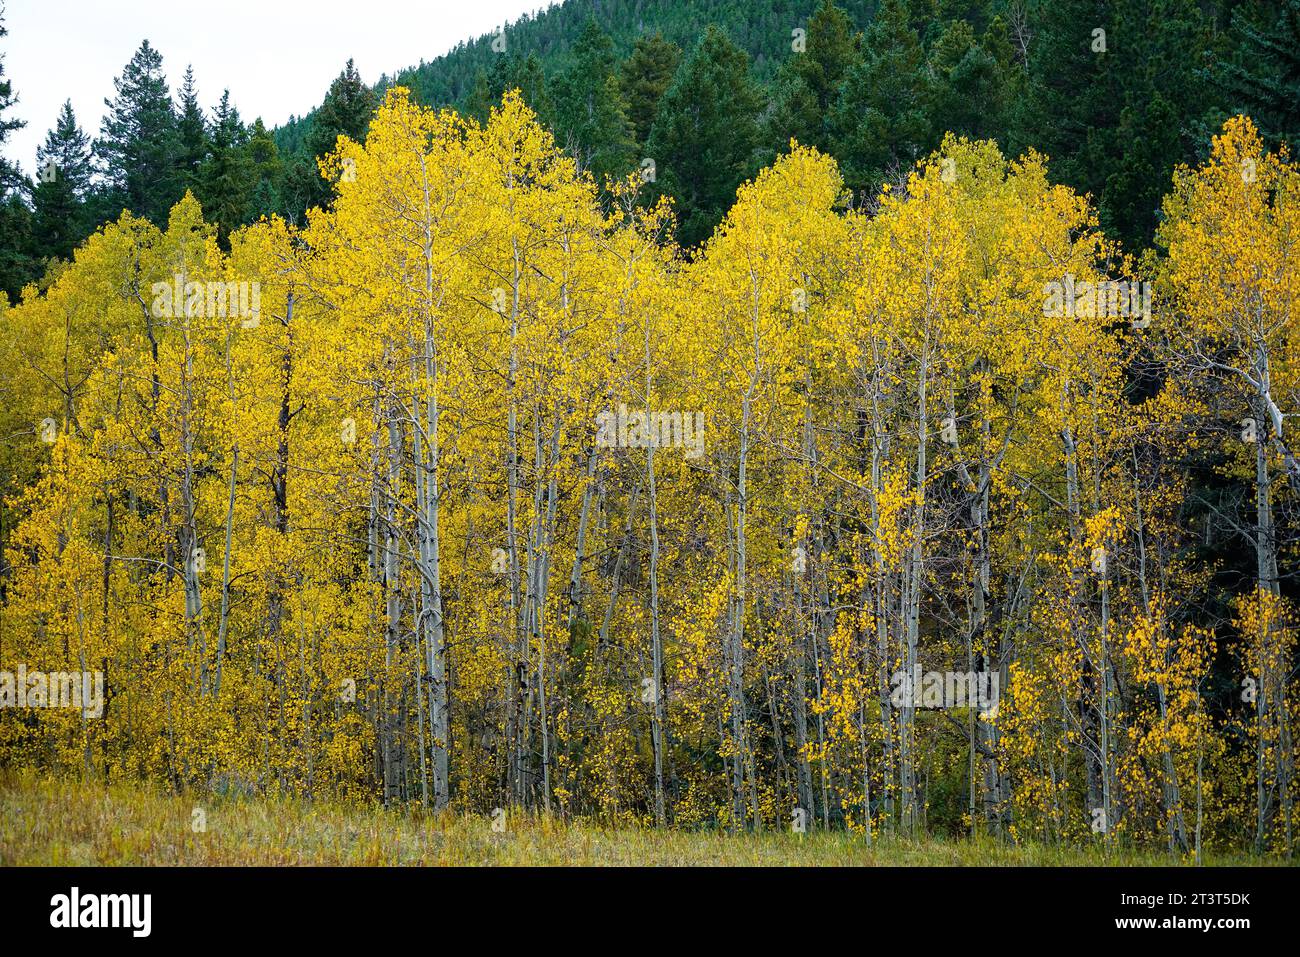 Changing Aspen leaves against a backdrop of vibrant green pines at Golden Gate Canyon State Park in Colorado. Stock Photo